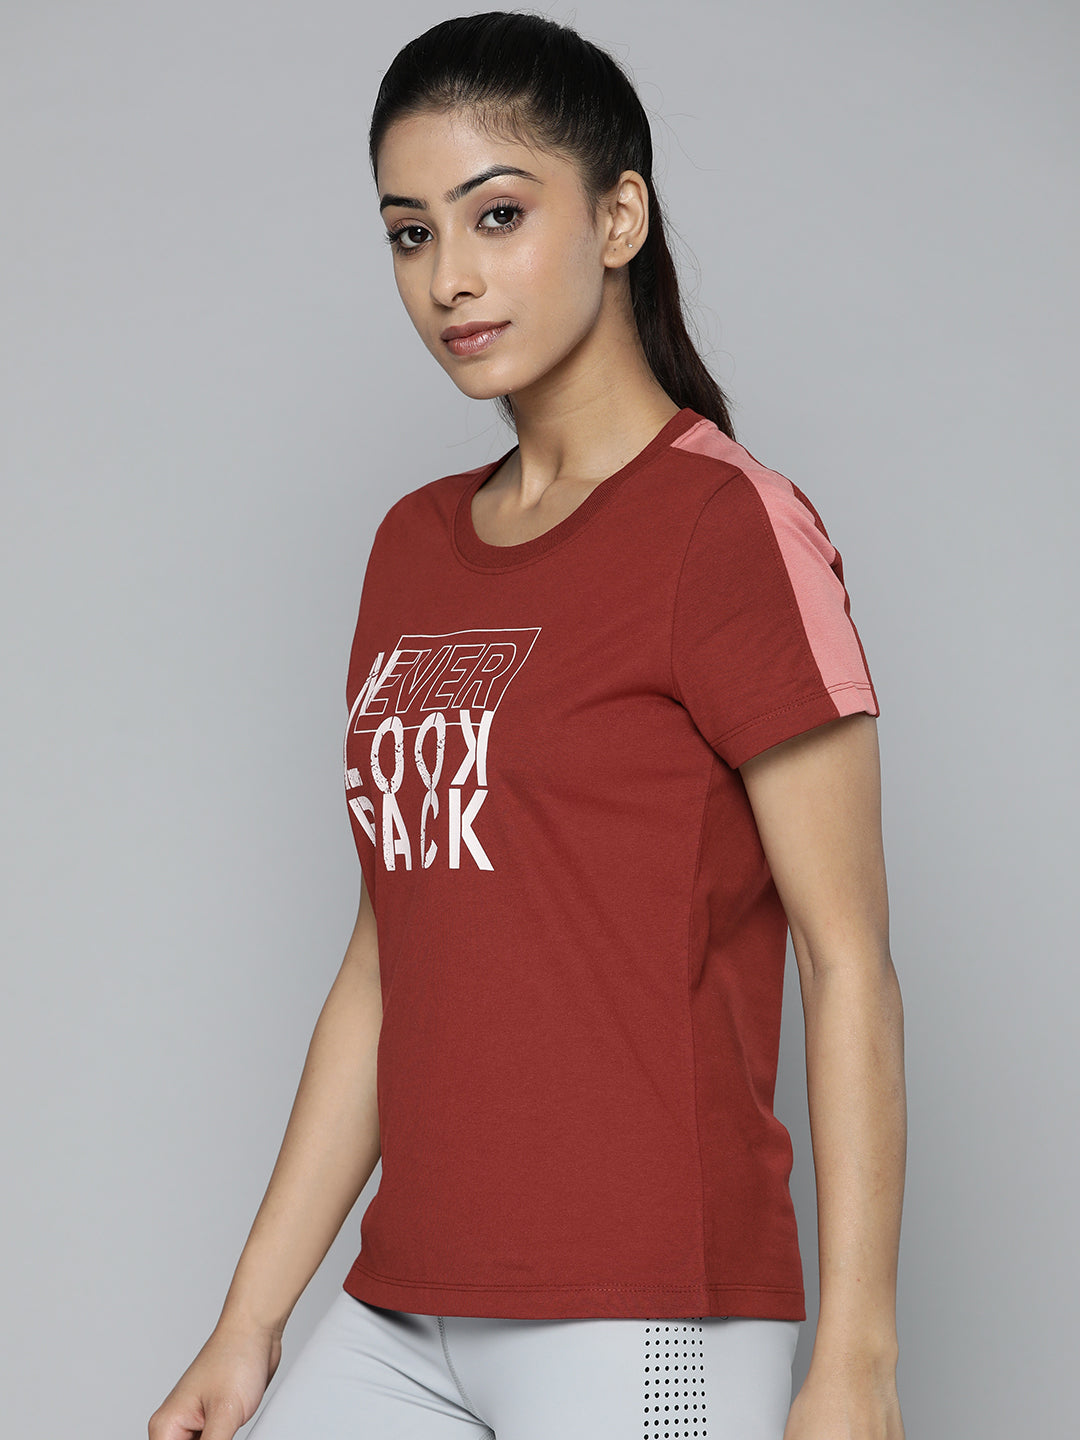 Women Rust Red & White Typography Printed Slim Fit Training or Gym T-shirt